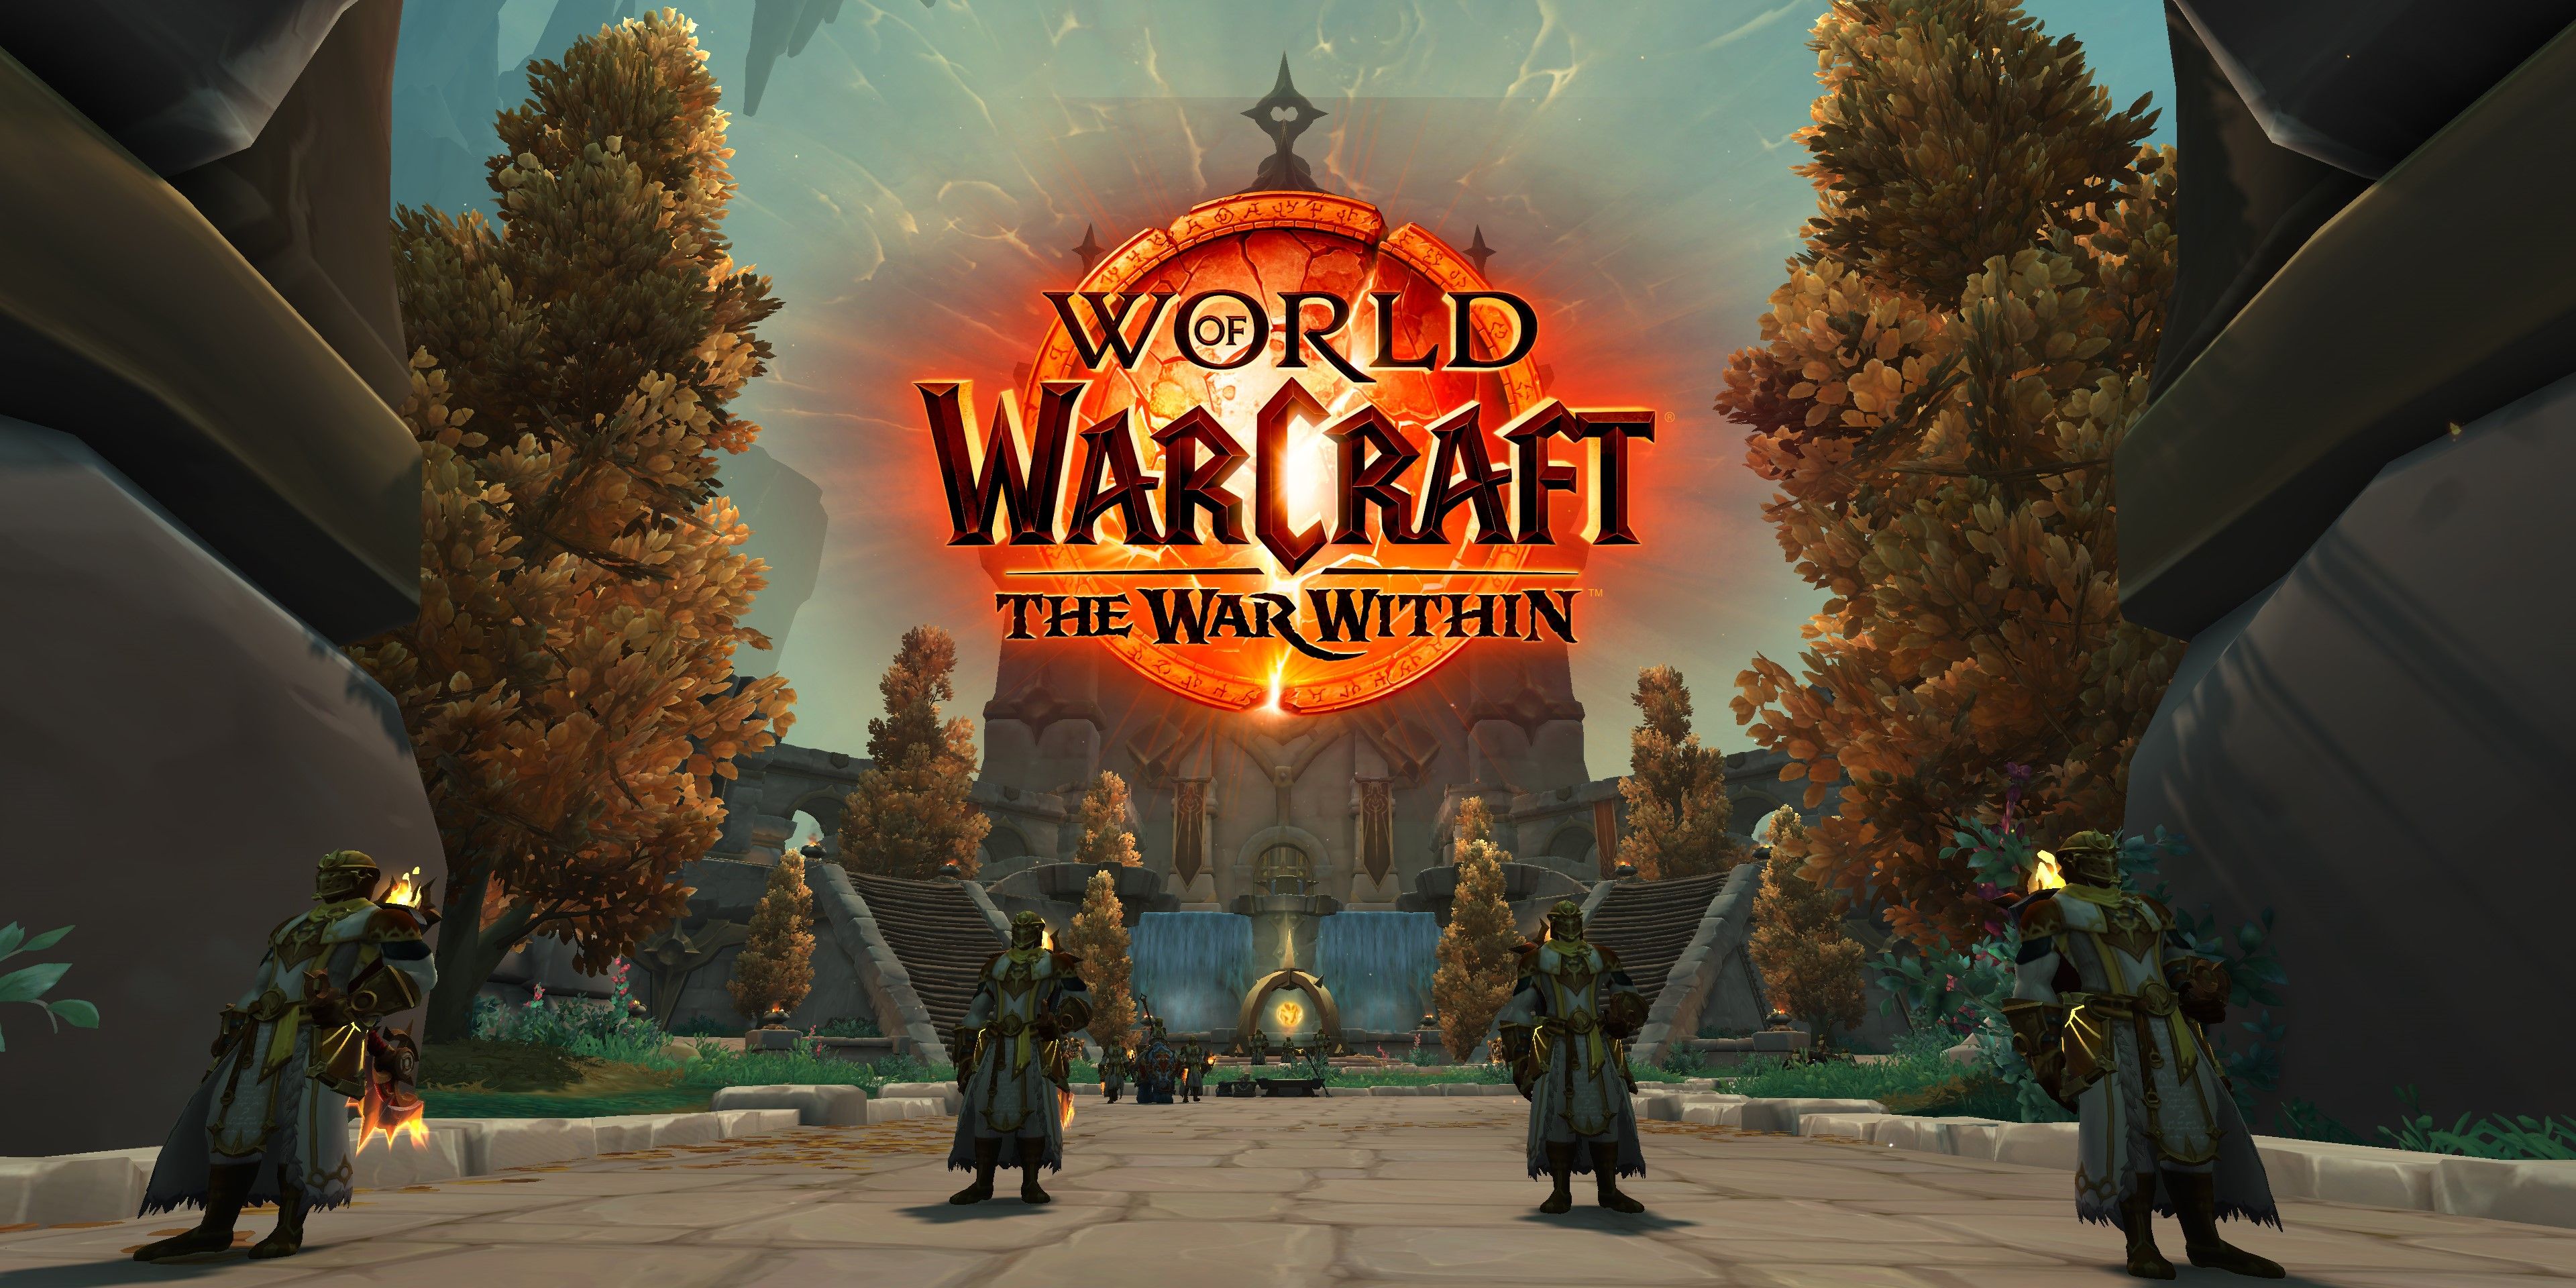 the priory of the sacred flame dungeon from wow the war within with the logo in front of it